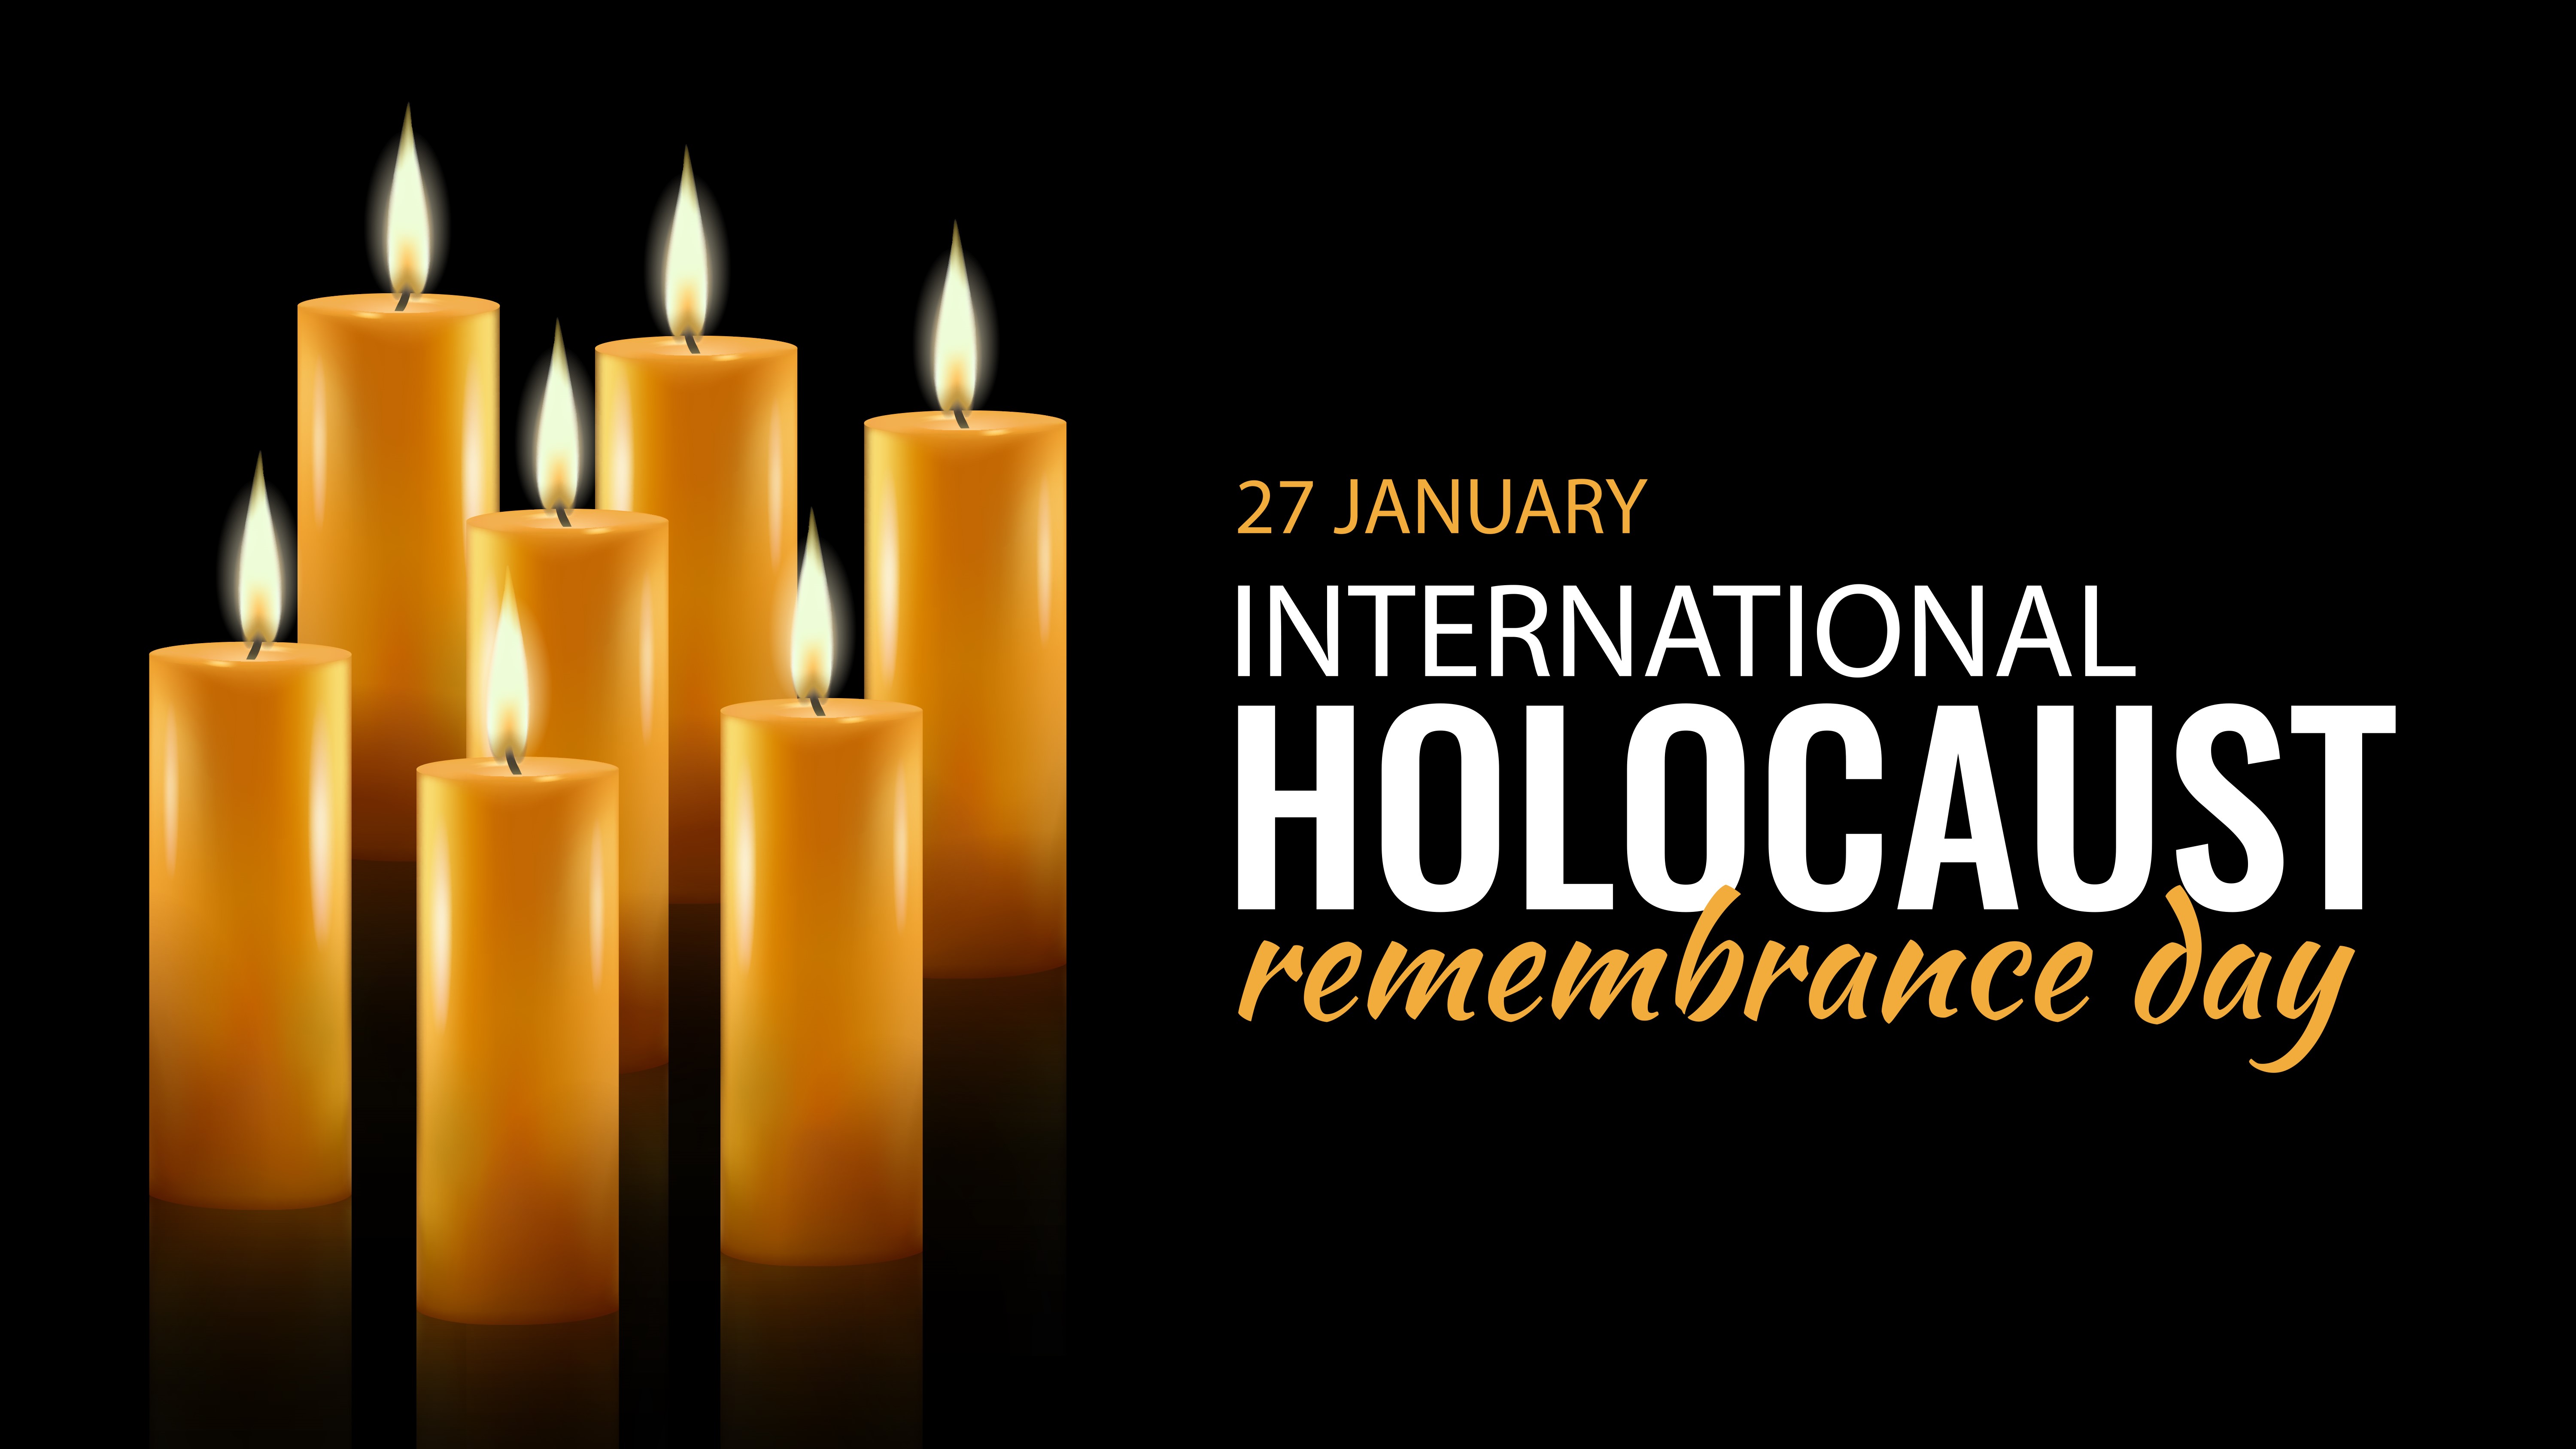 Reading, Listening, Learning: Ways to Remember this International Holocaust Memorial Day